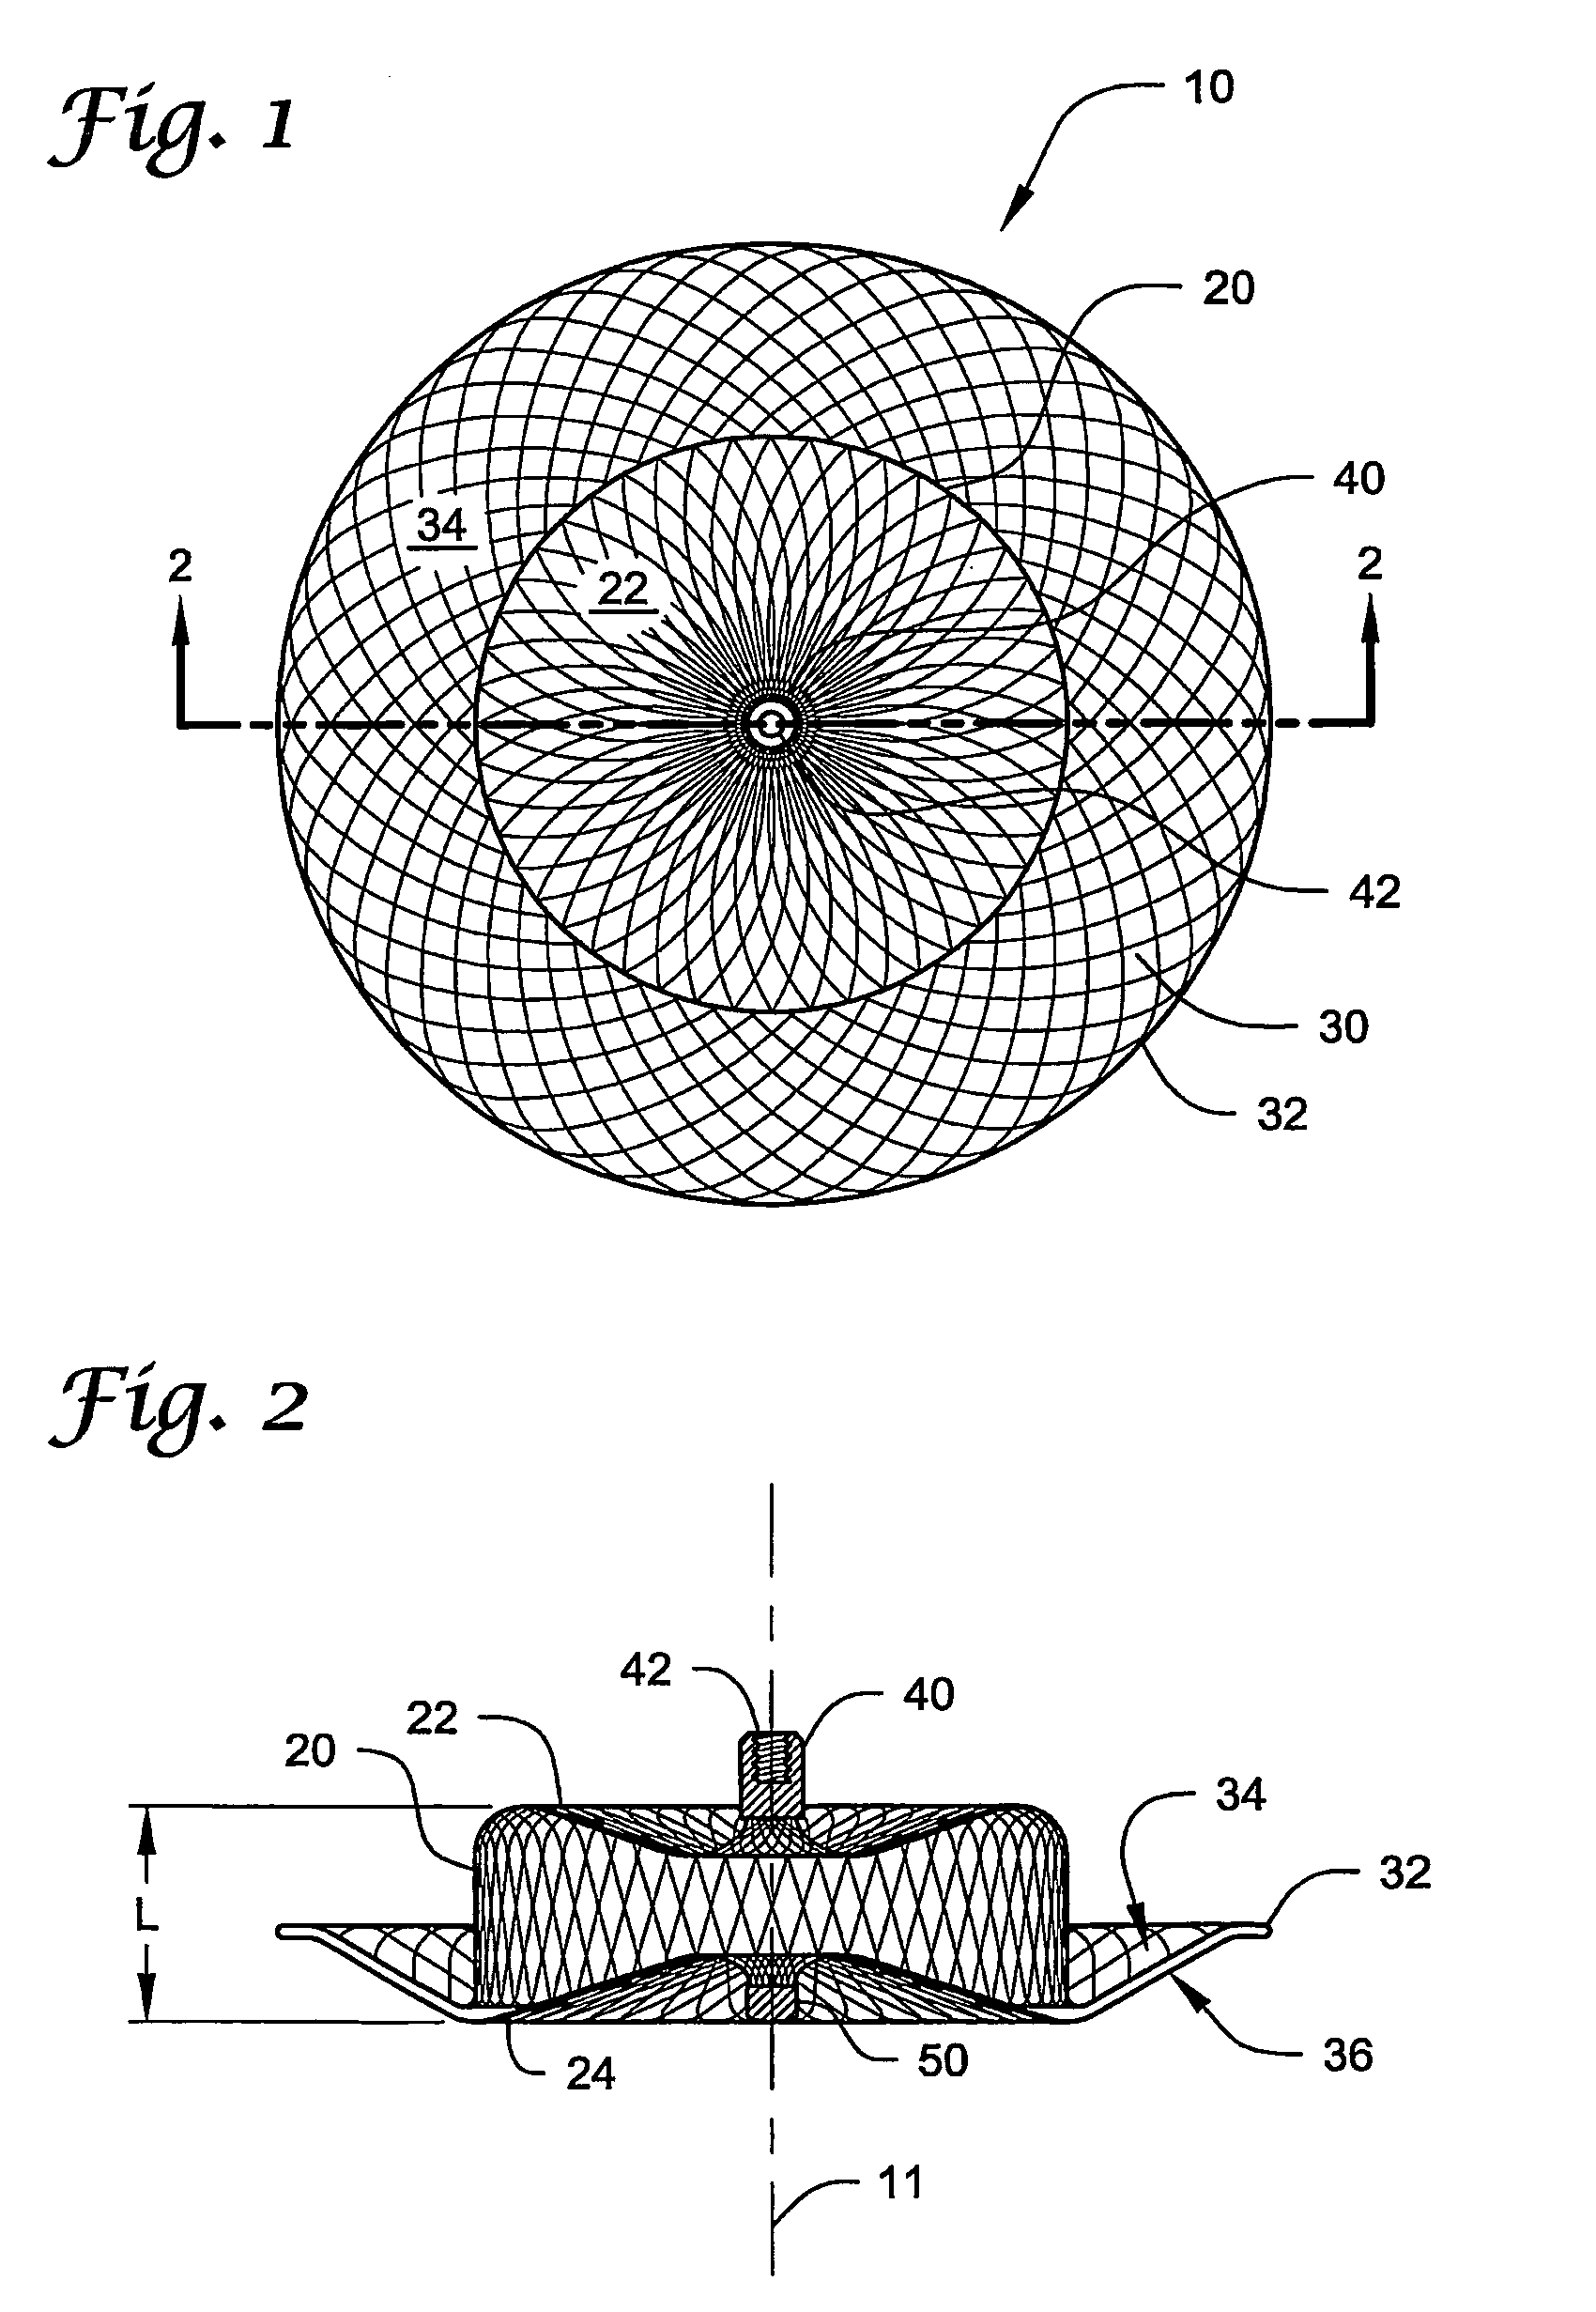 Flanged occlusion devices and methods